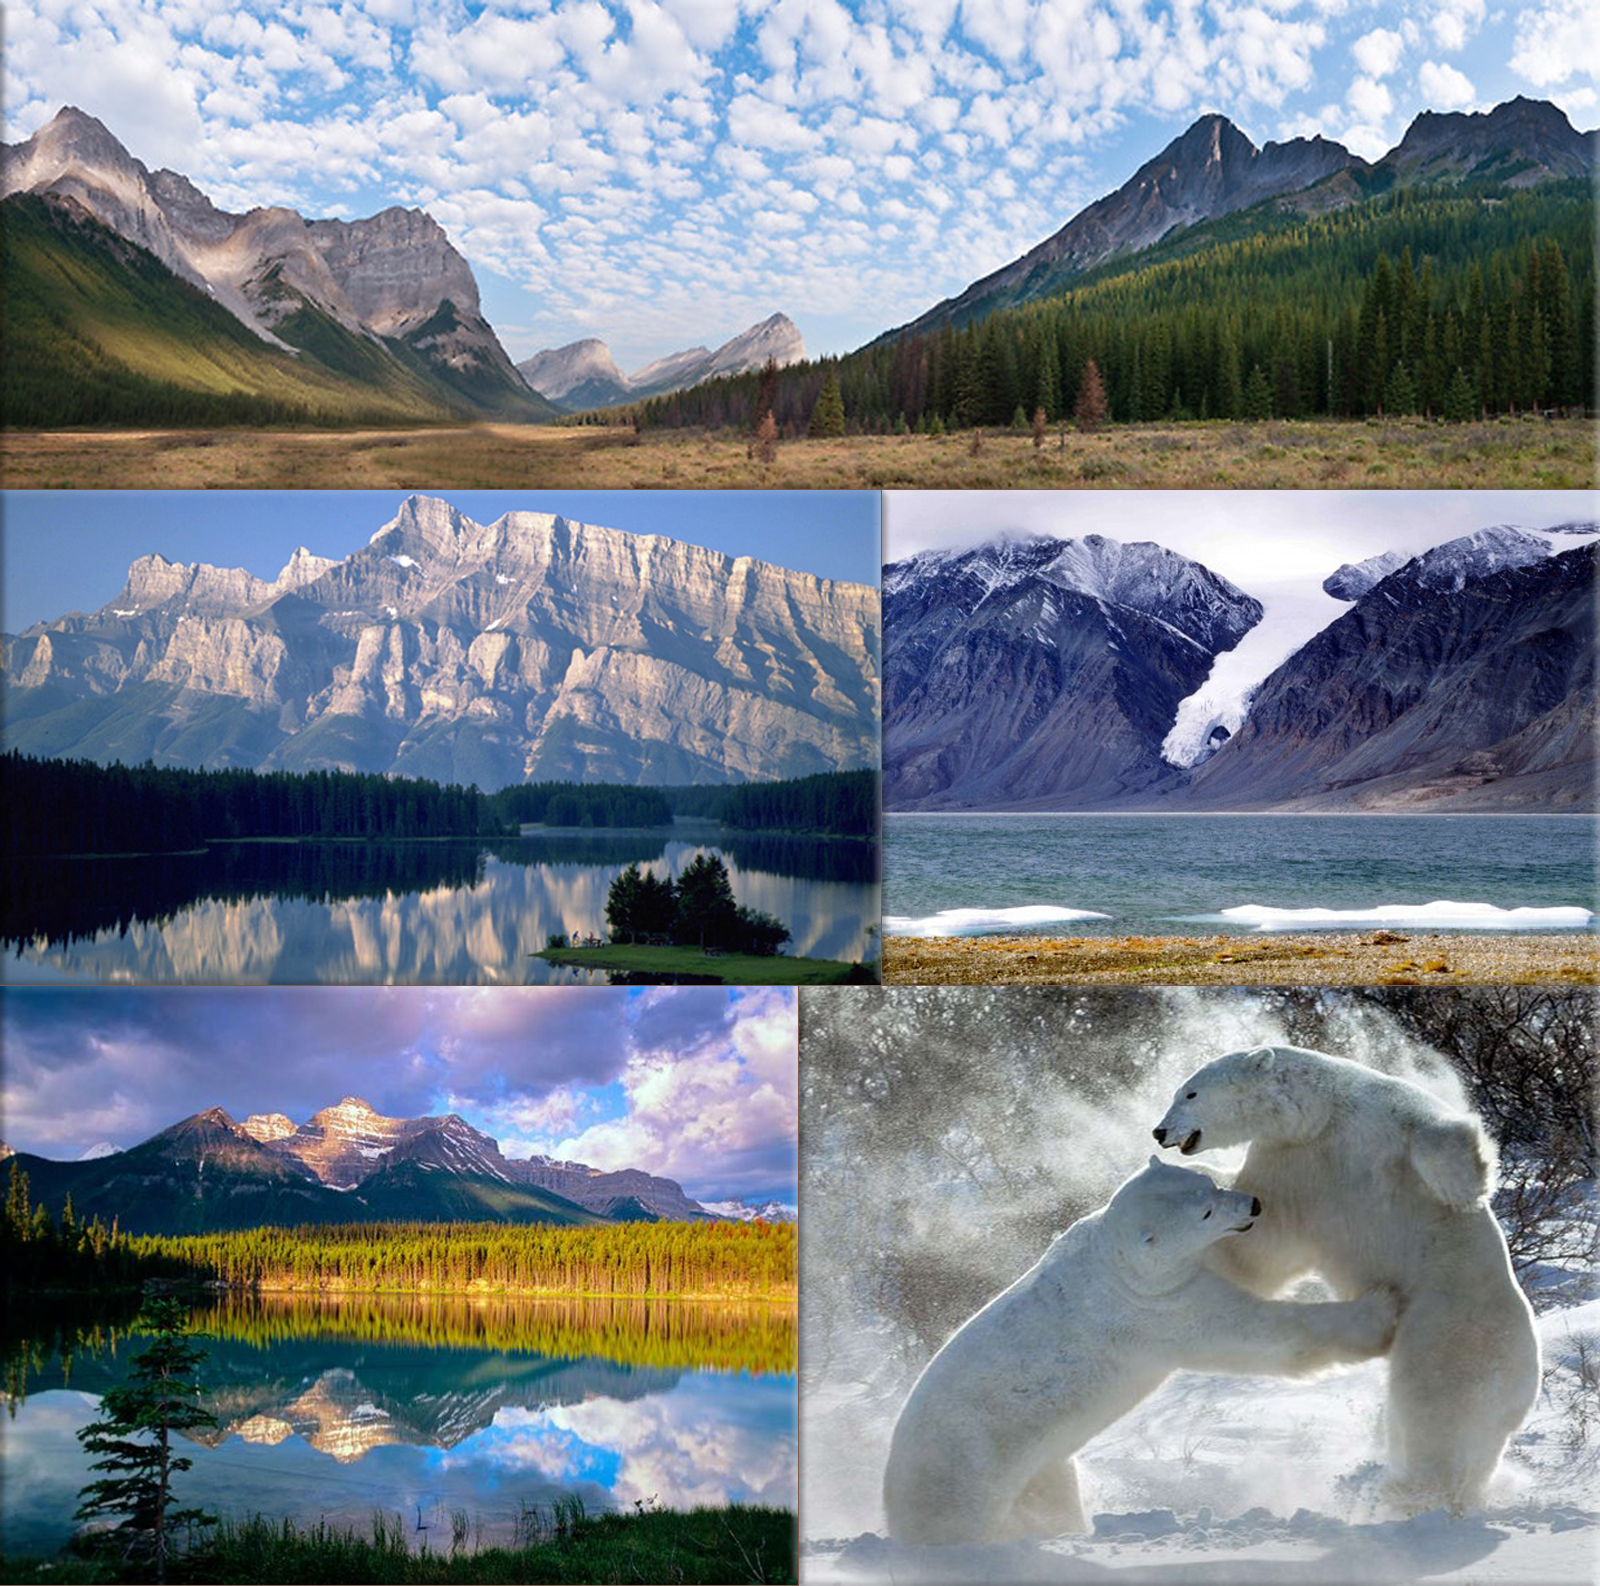 Parks Canada: the world's first national park service, is established as the Dominion Parks Branch under the Department of the Interior on May 19th, 1911.